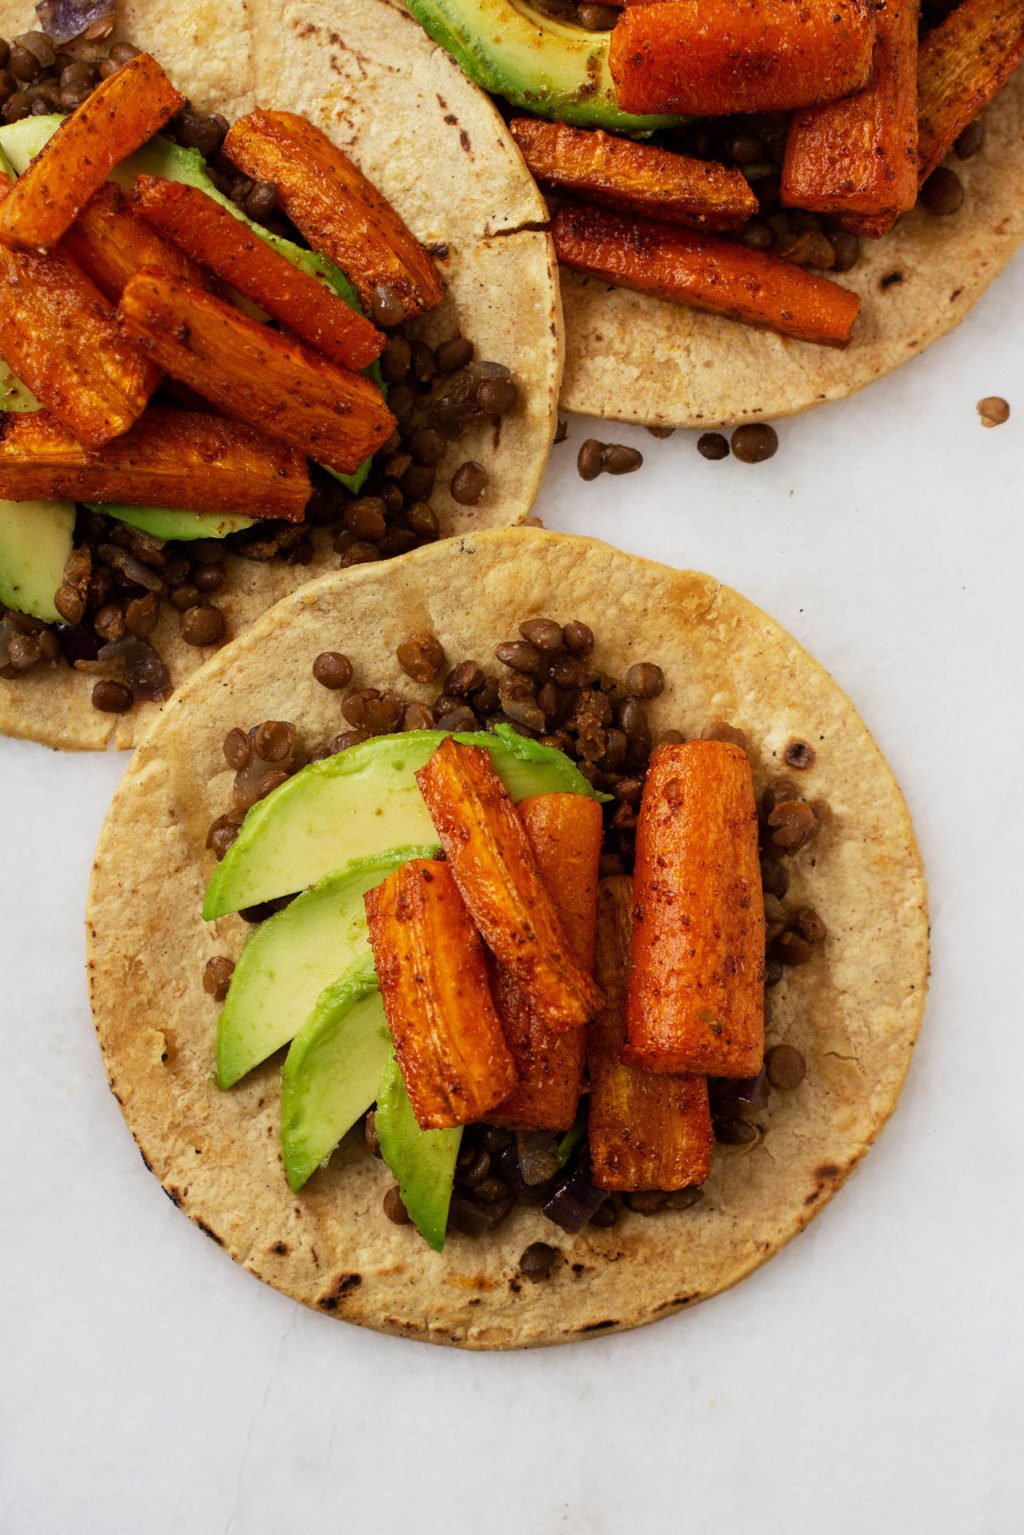 Three vegan roasted carrot lentil tacos with avocado slices.